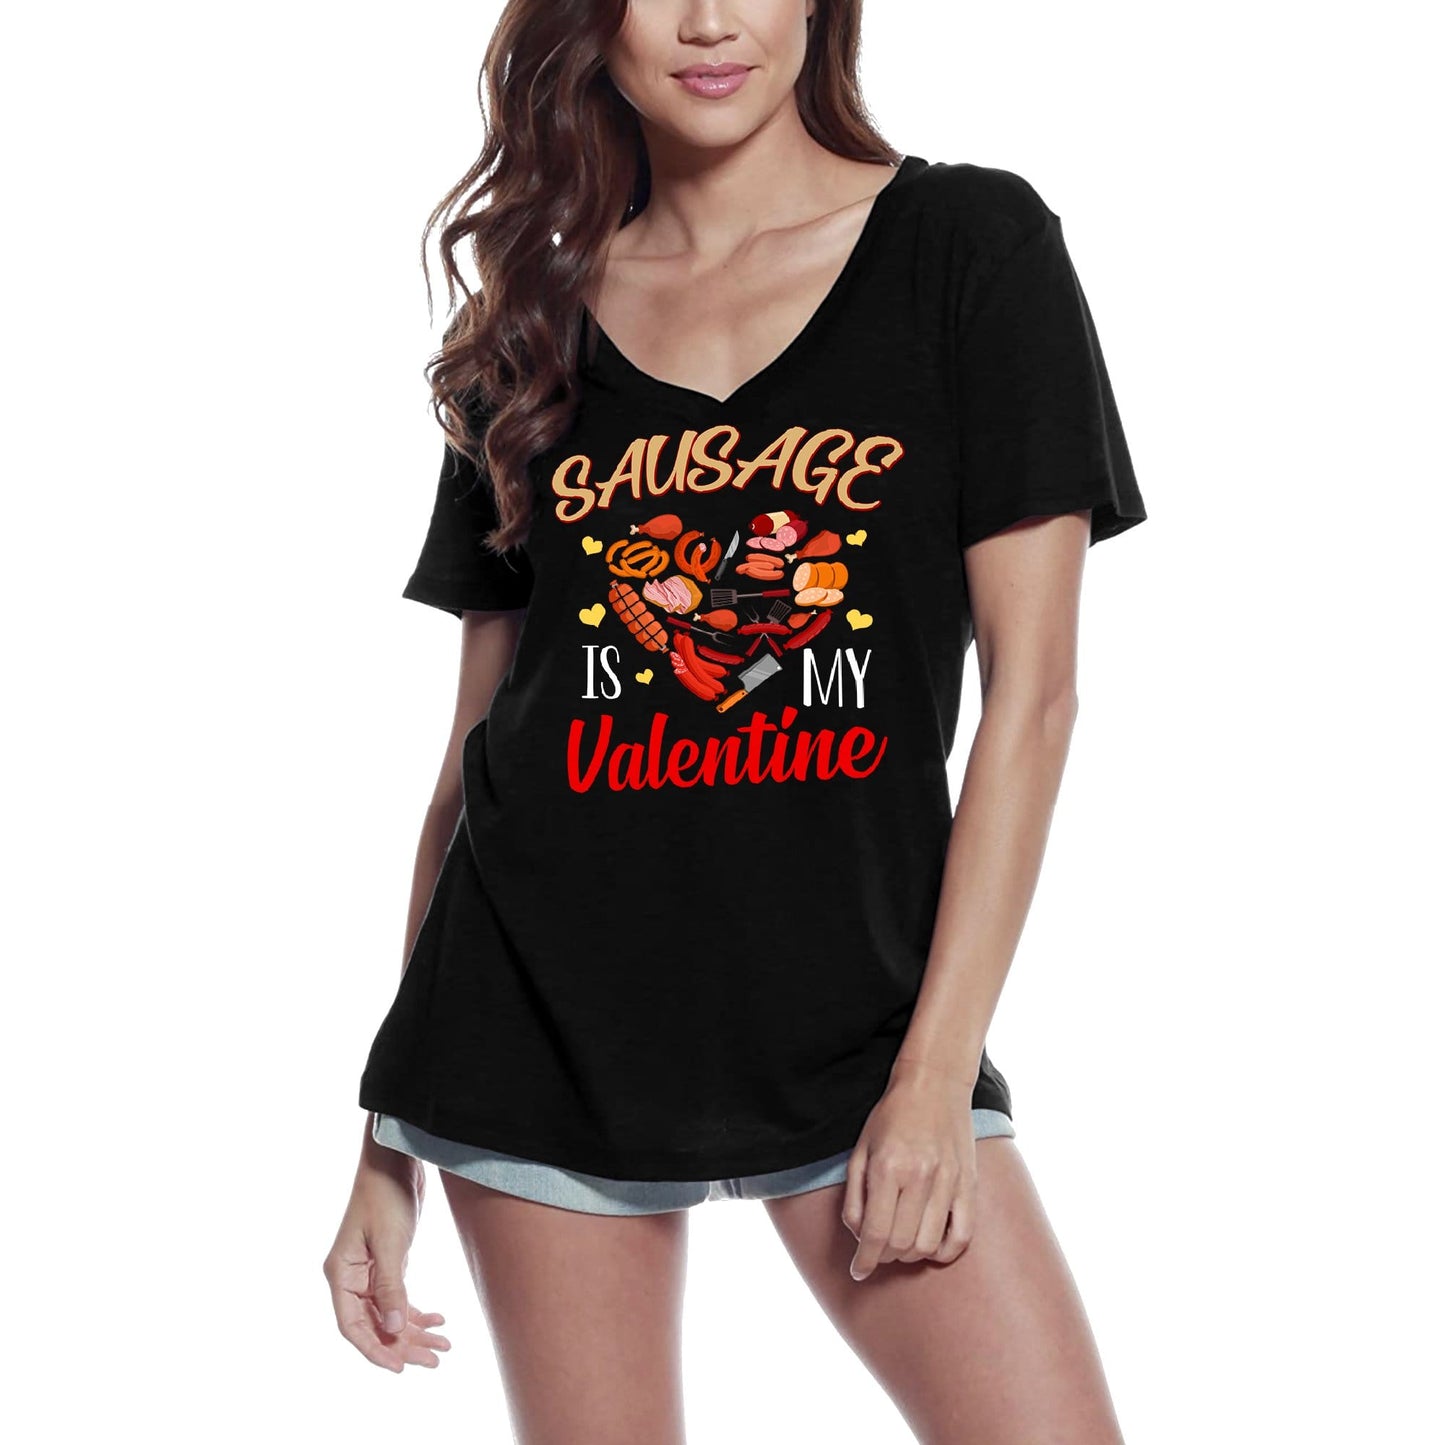 ULTRABASIC Women's T-Shirt Sausage Is My Valentine - Valentine's Day Short Sleeve Graphic Tees Tops